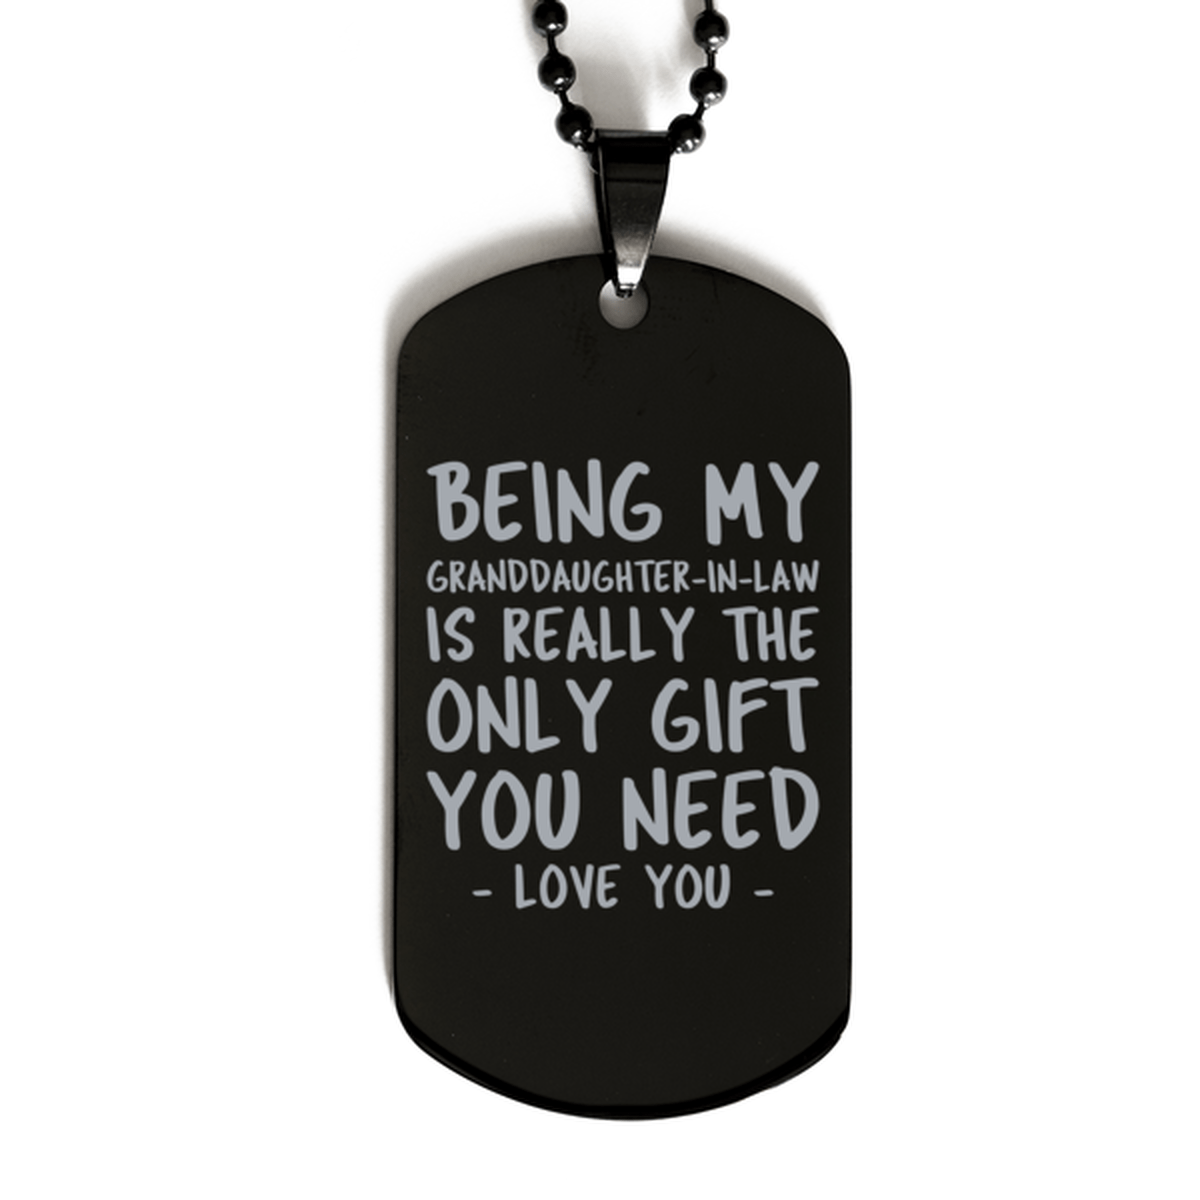 Funny Granddaughter-in-law Black Dog Tag Necklace, Being My Granddaughter-in-law Is Really the Only Gift You Need, Best Birthday Gifts for Granddaughter-in-law